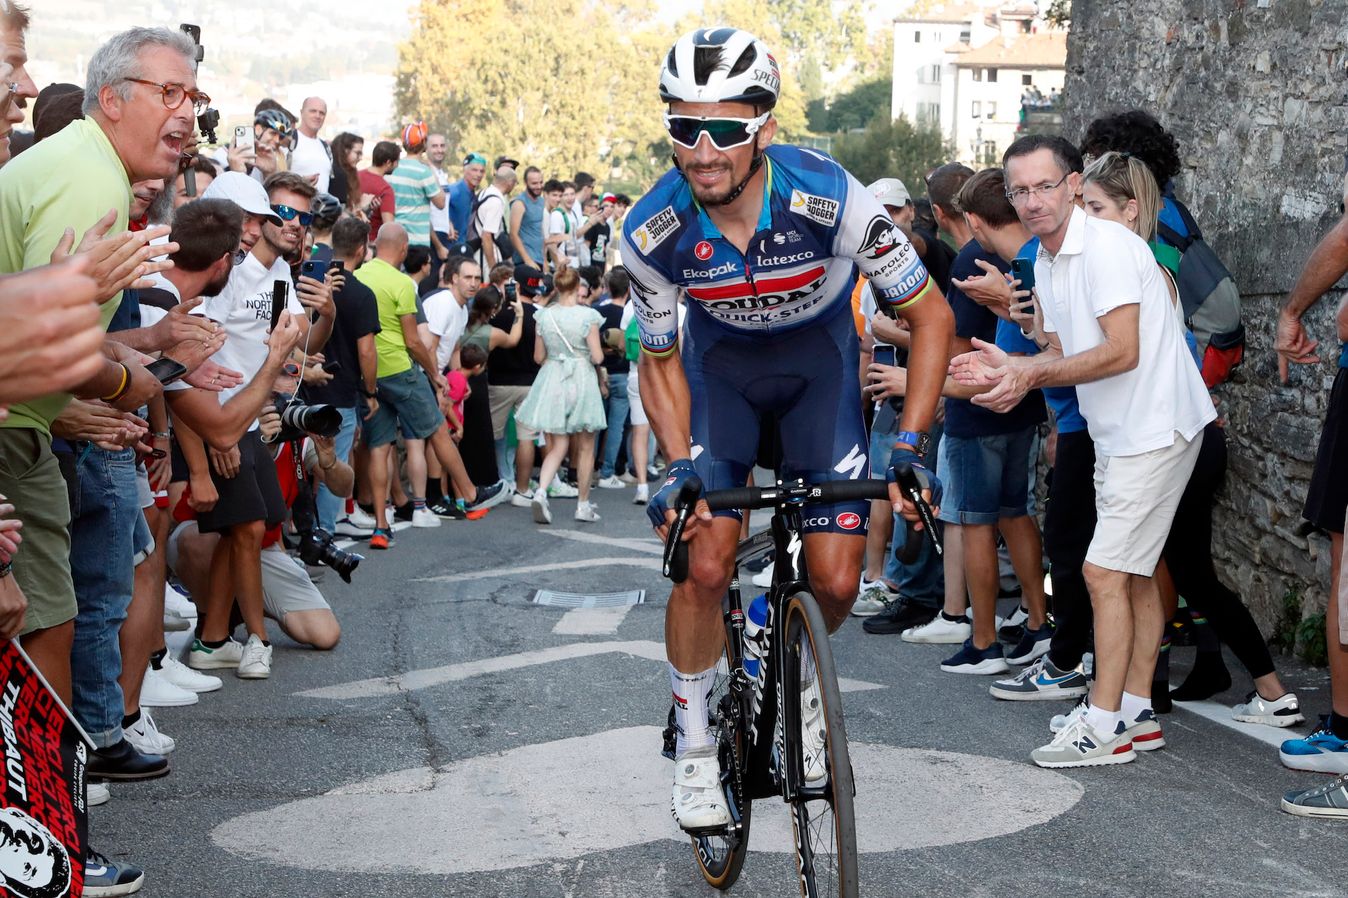 Two-time world champ Julian Alaphilippe is the most decorated rider on the men's market